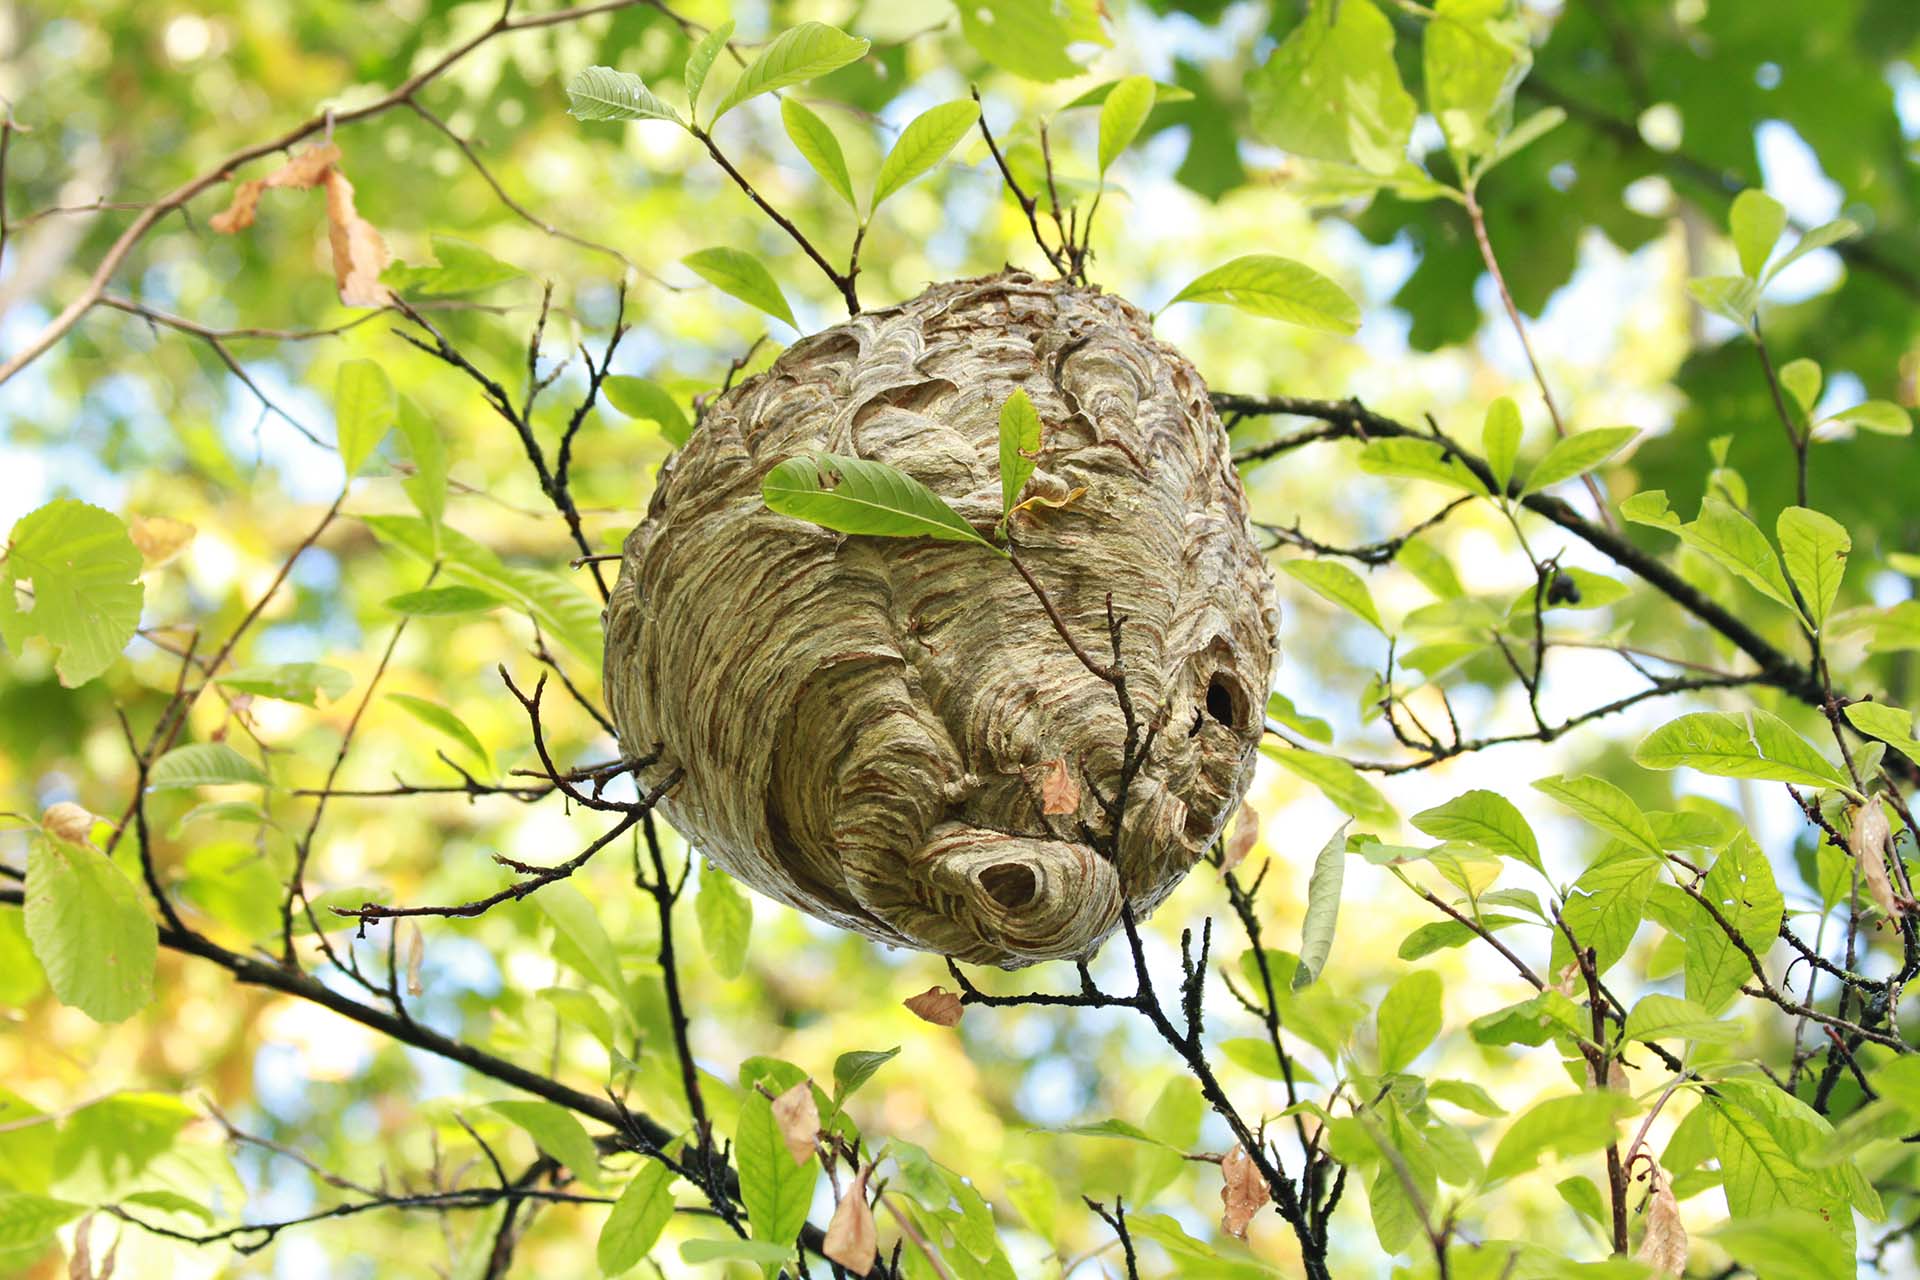 How to Spot Wasp Activity - picture shows a wasp nest in a tree